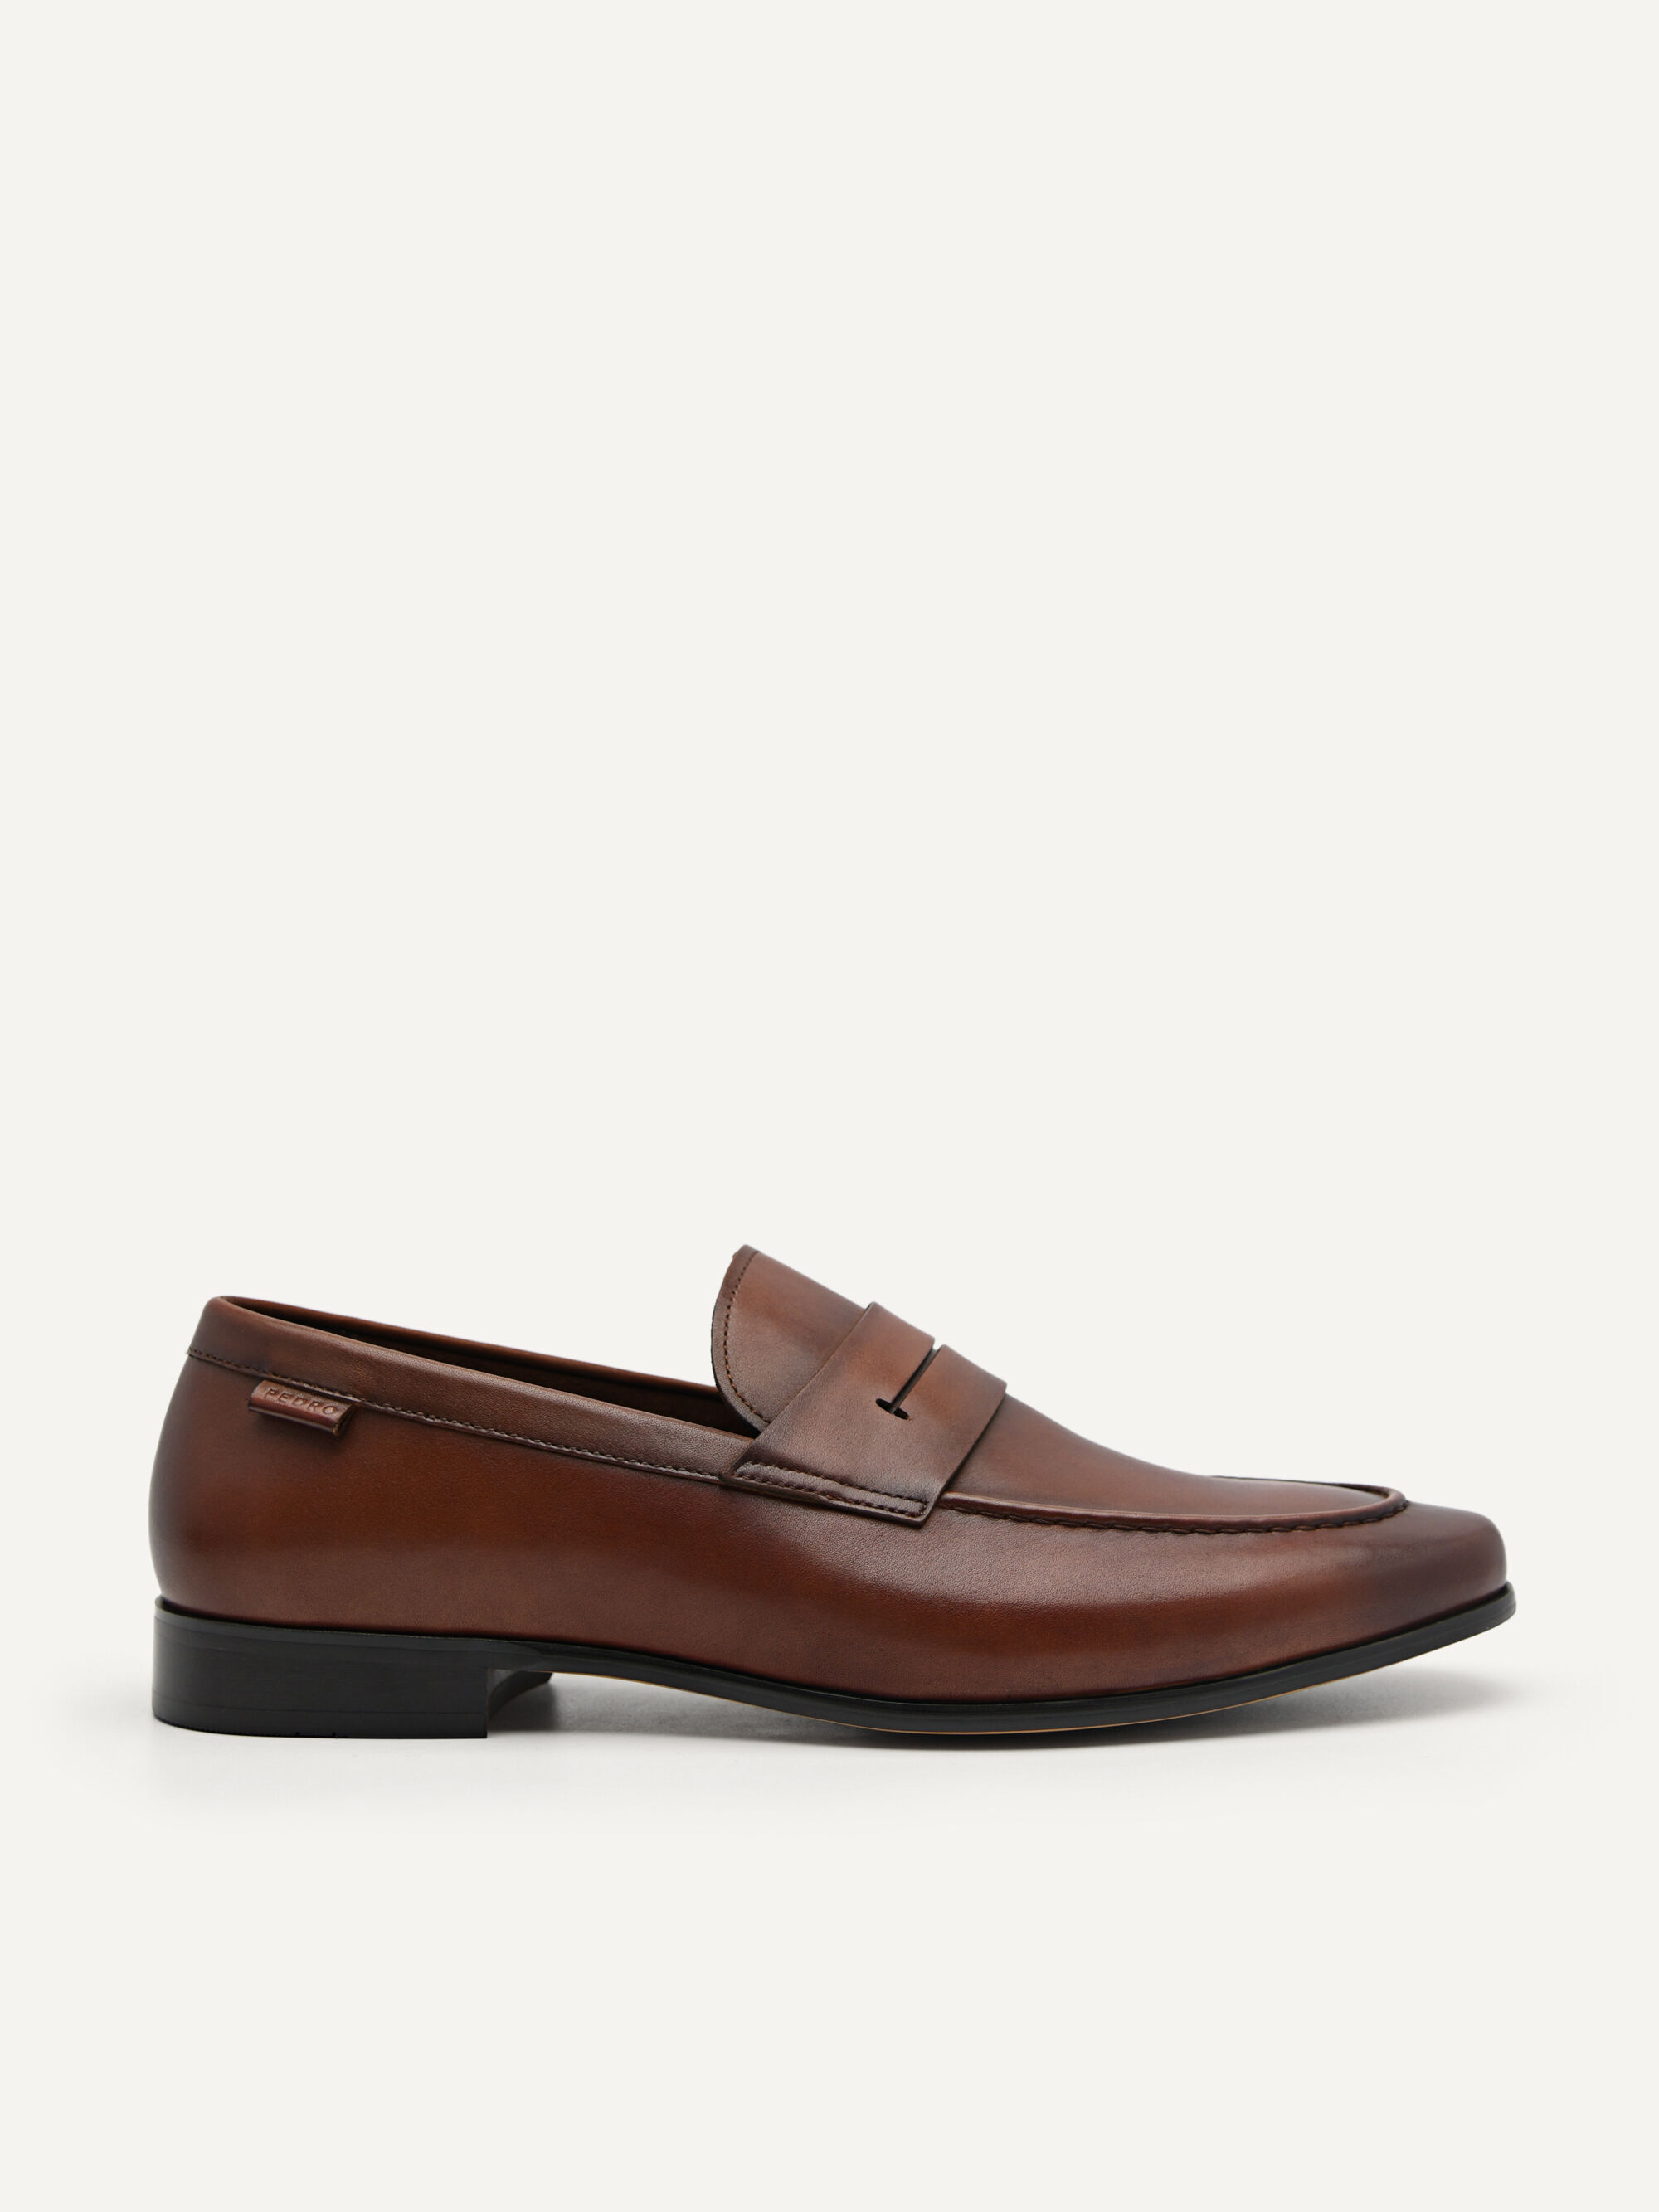 Firth Leather Loafers, Cognac